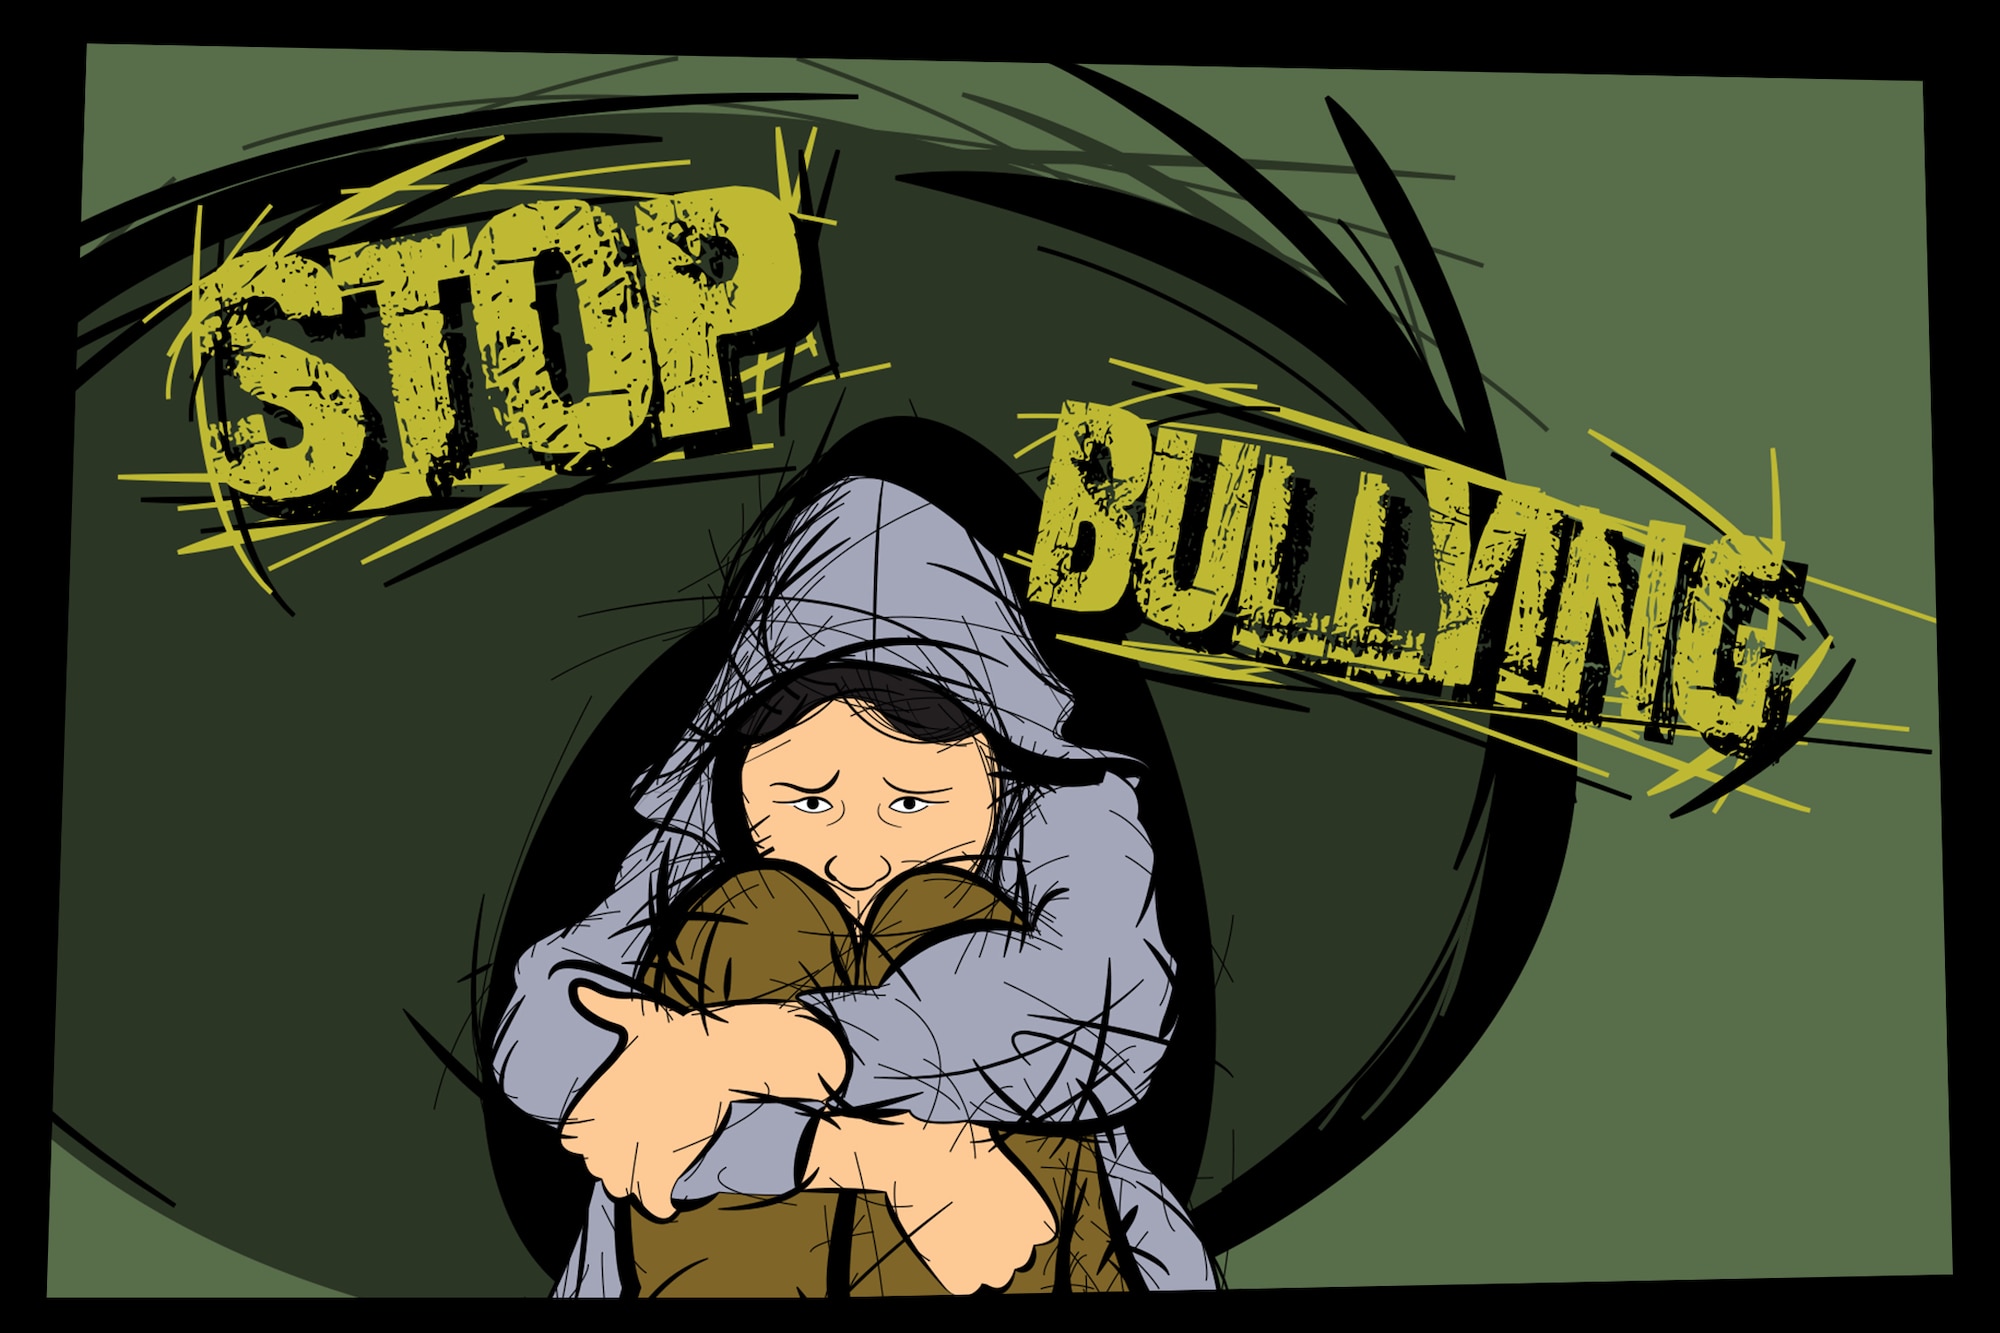 Bullying comes in various forms including physical, verbal, emotional and over the internet. Parents should let their children know it’s safe to talk to them about bullying and pick up on warning signs such as changes in behavior or disinterest in attending school. For more information on bullying prevention, contact the Moody Air Force Base school liaison officer or Exceptional Family Member Program Family Support coordinator at 229-257-4380. (U.S. Air Force illustration by Staff Sgt. Jamal D. Sutter/RELEASED) 
